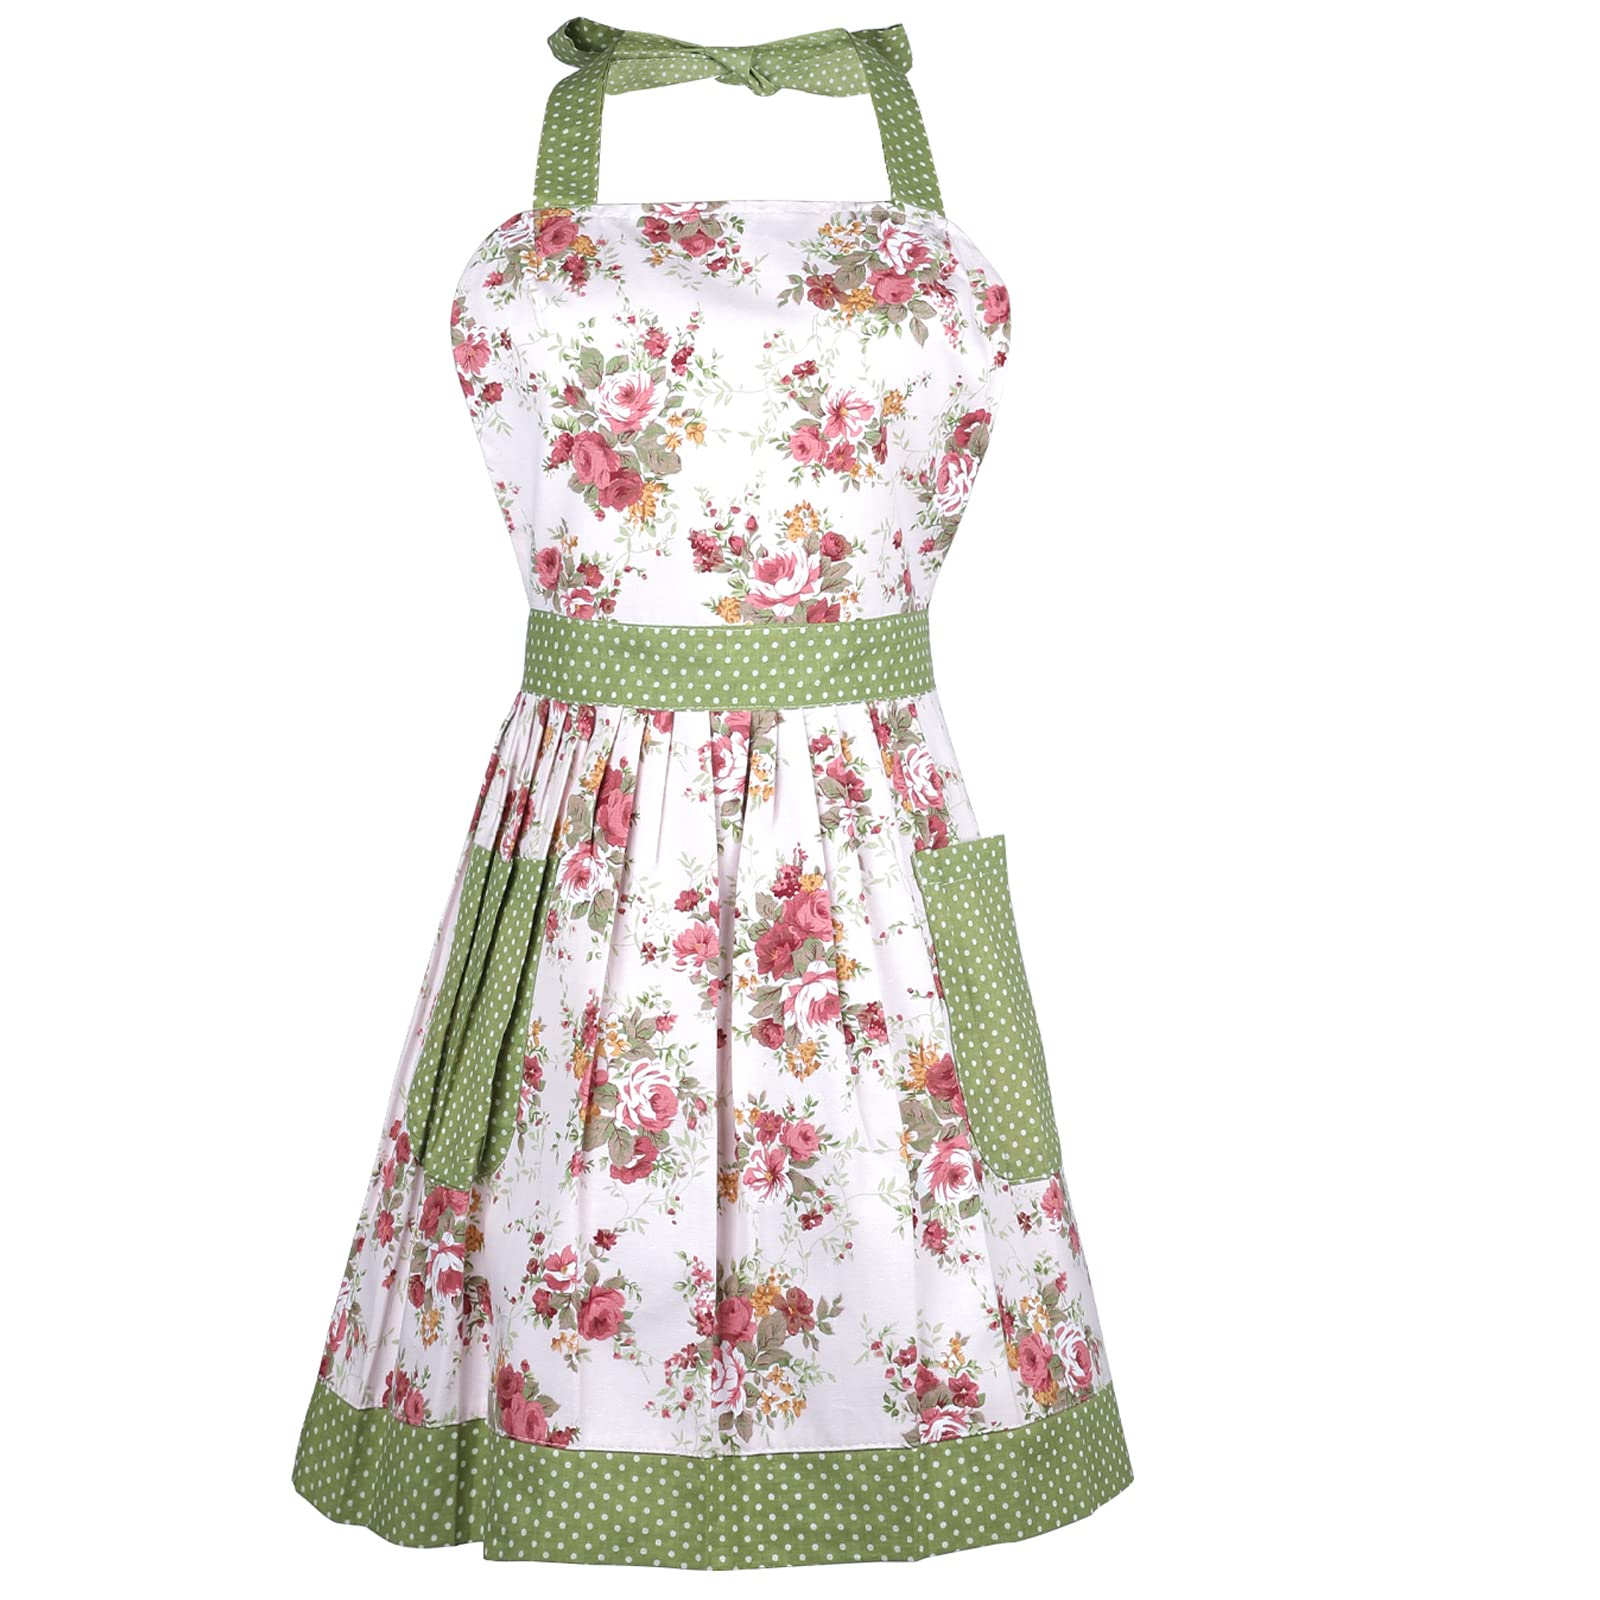 G2PLUS Lovely Women's Cooking Apron Cotton Baking Aprons Kitchen Pinafore with Pocket Great for Wife Girls